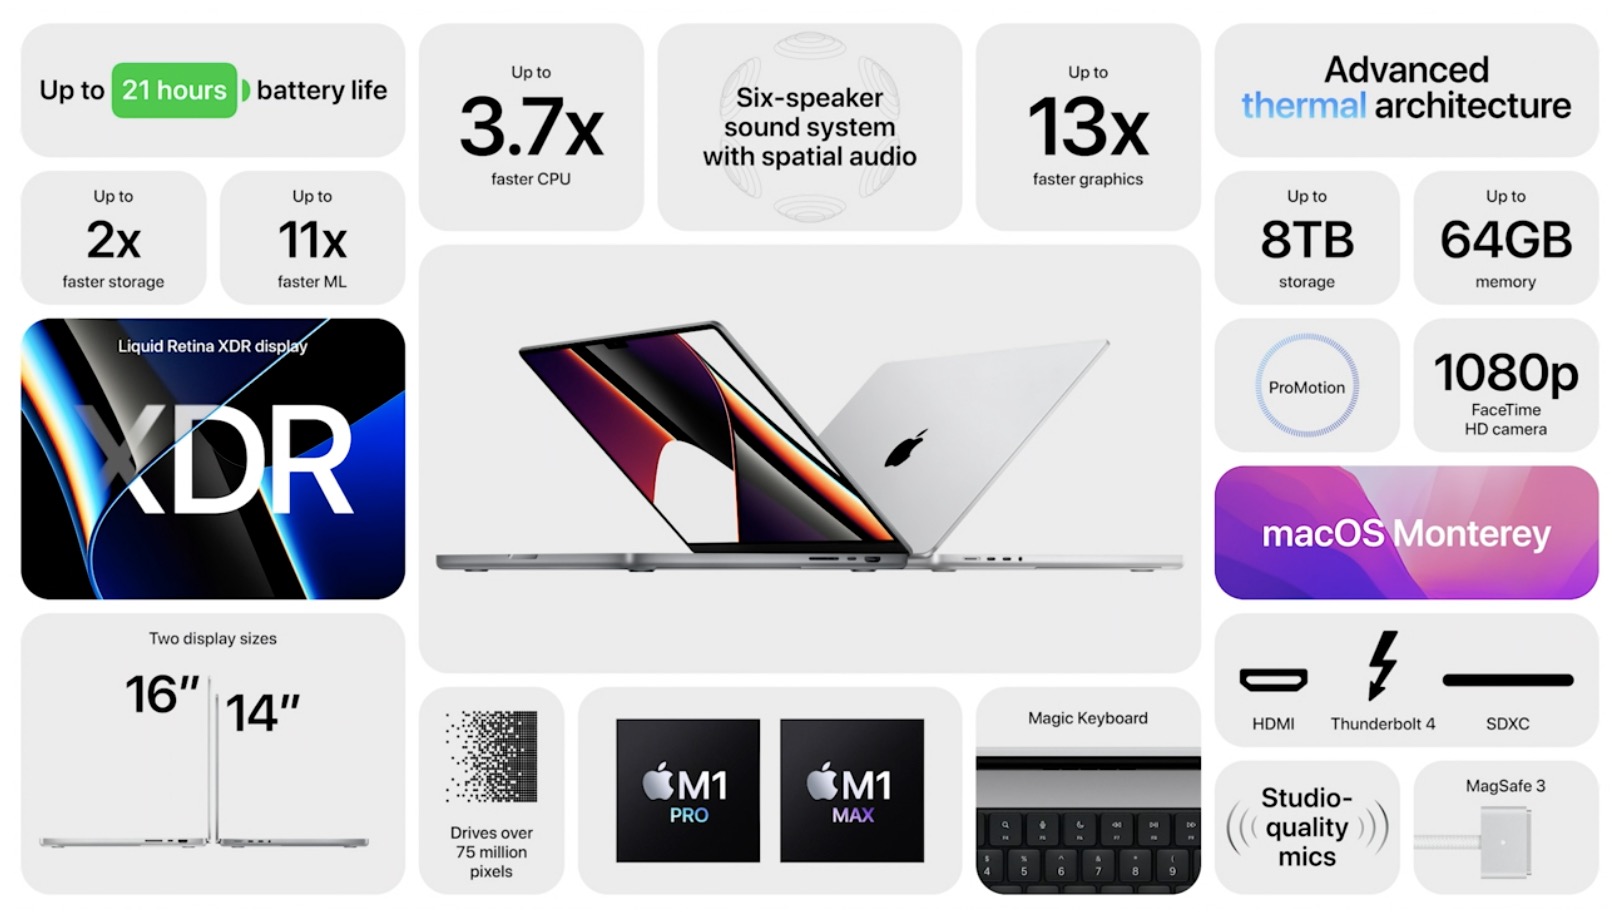 Apple's marketing image listing all the key features of the 2021 MacBook Pro notebooks